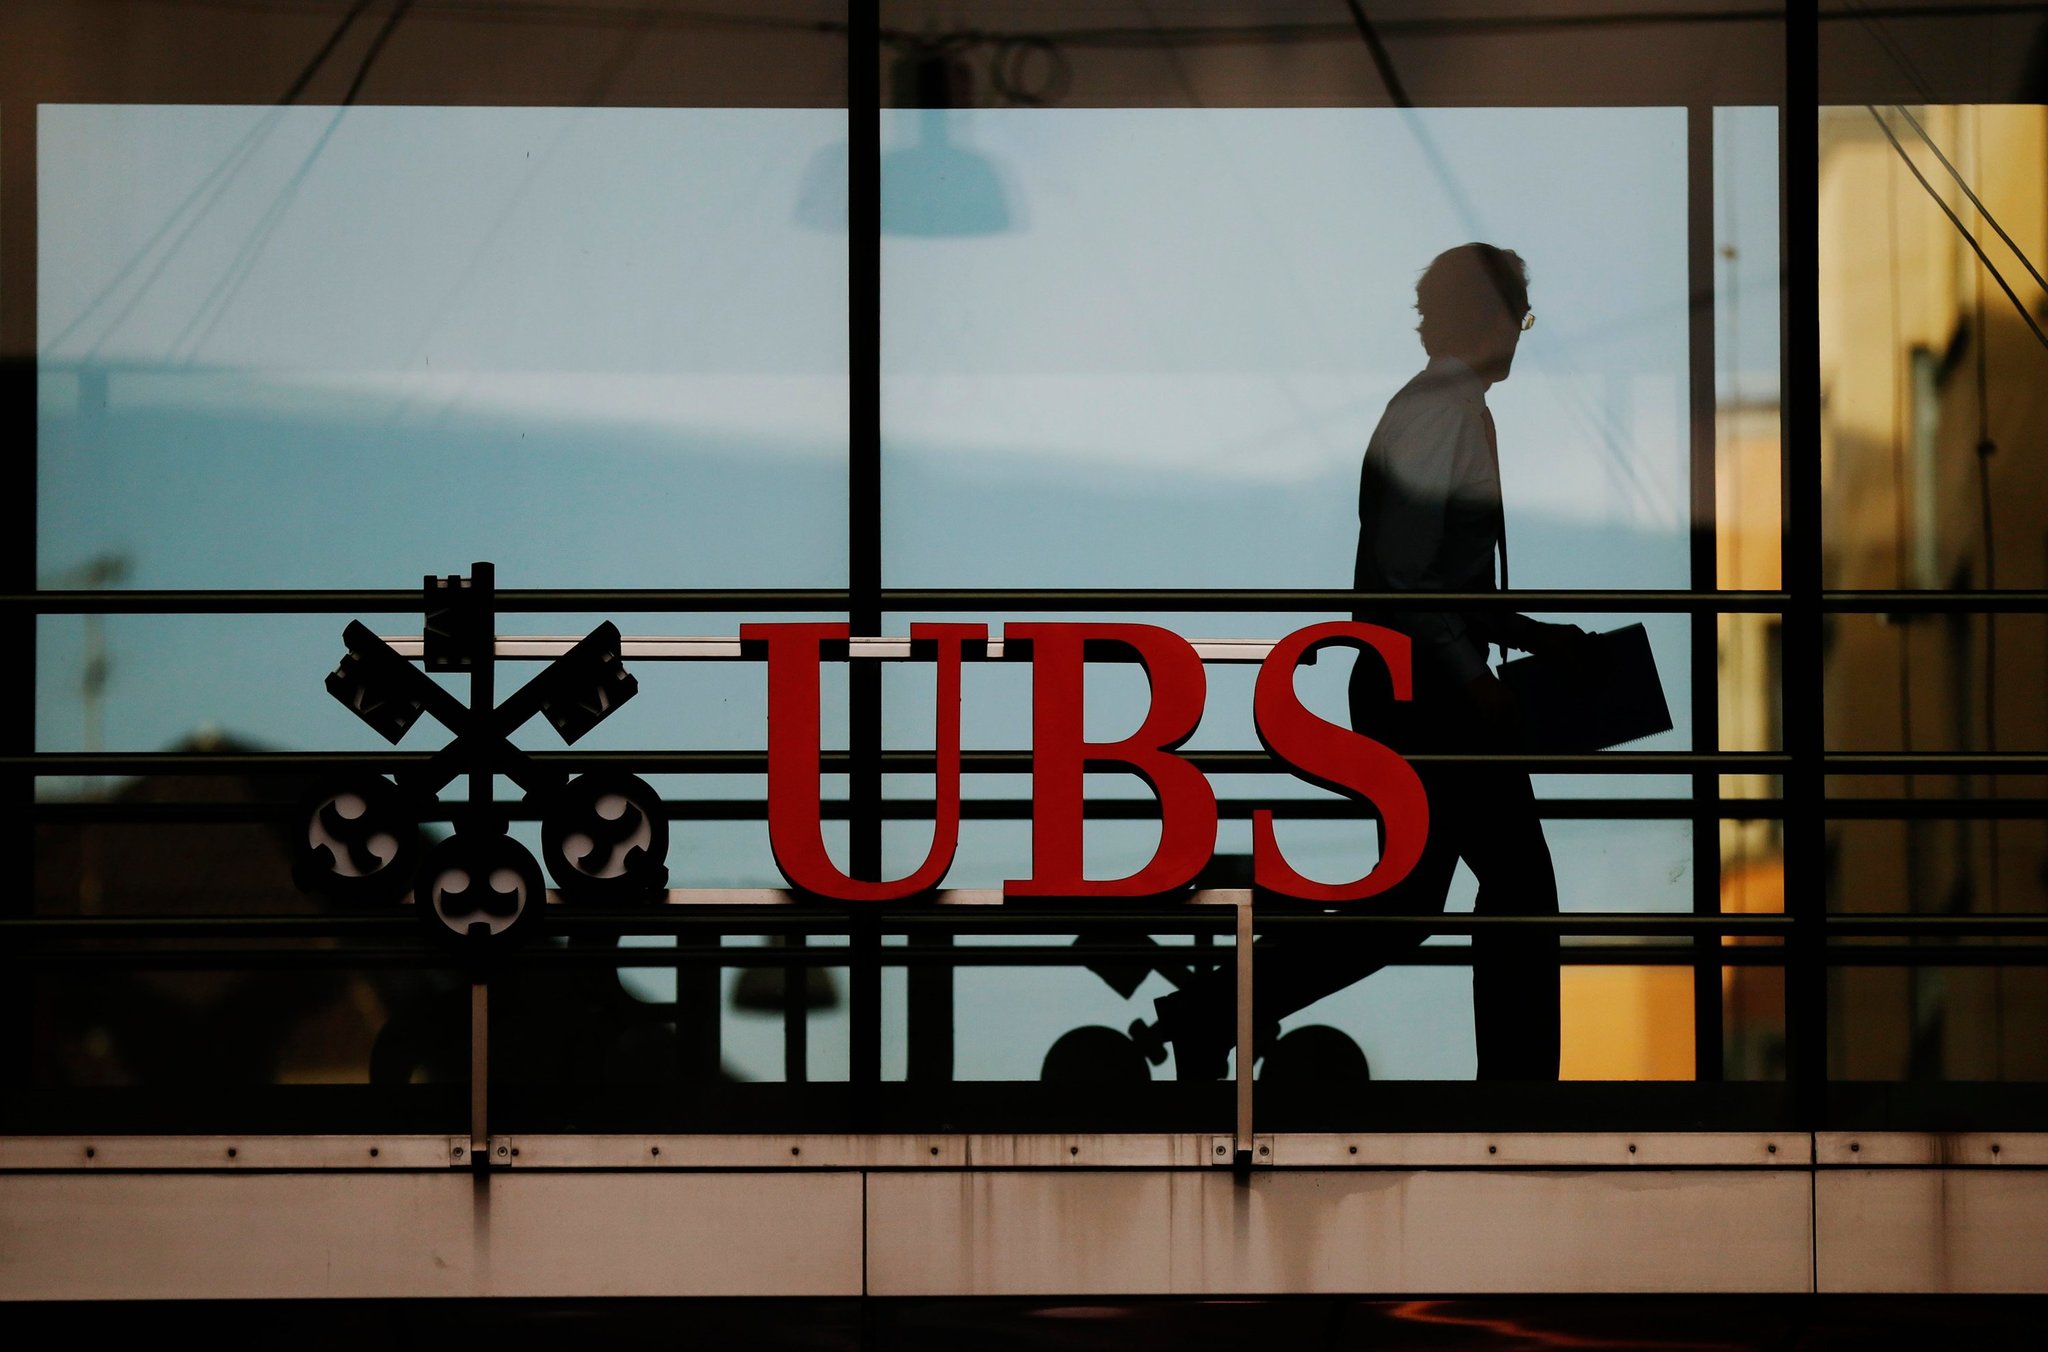 Global stock markets likely to strengthen in next 6 months: UBS